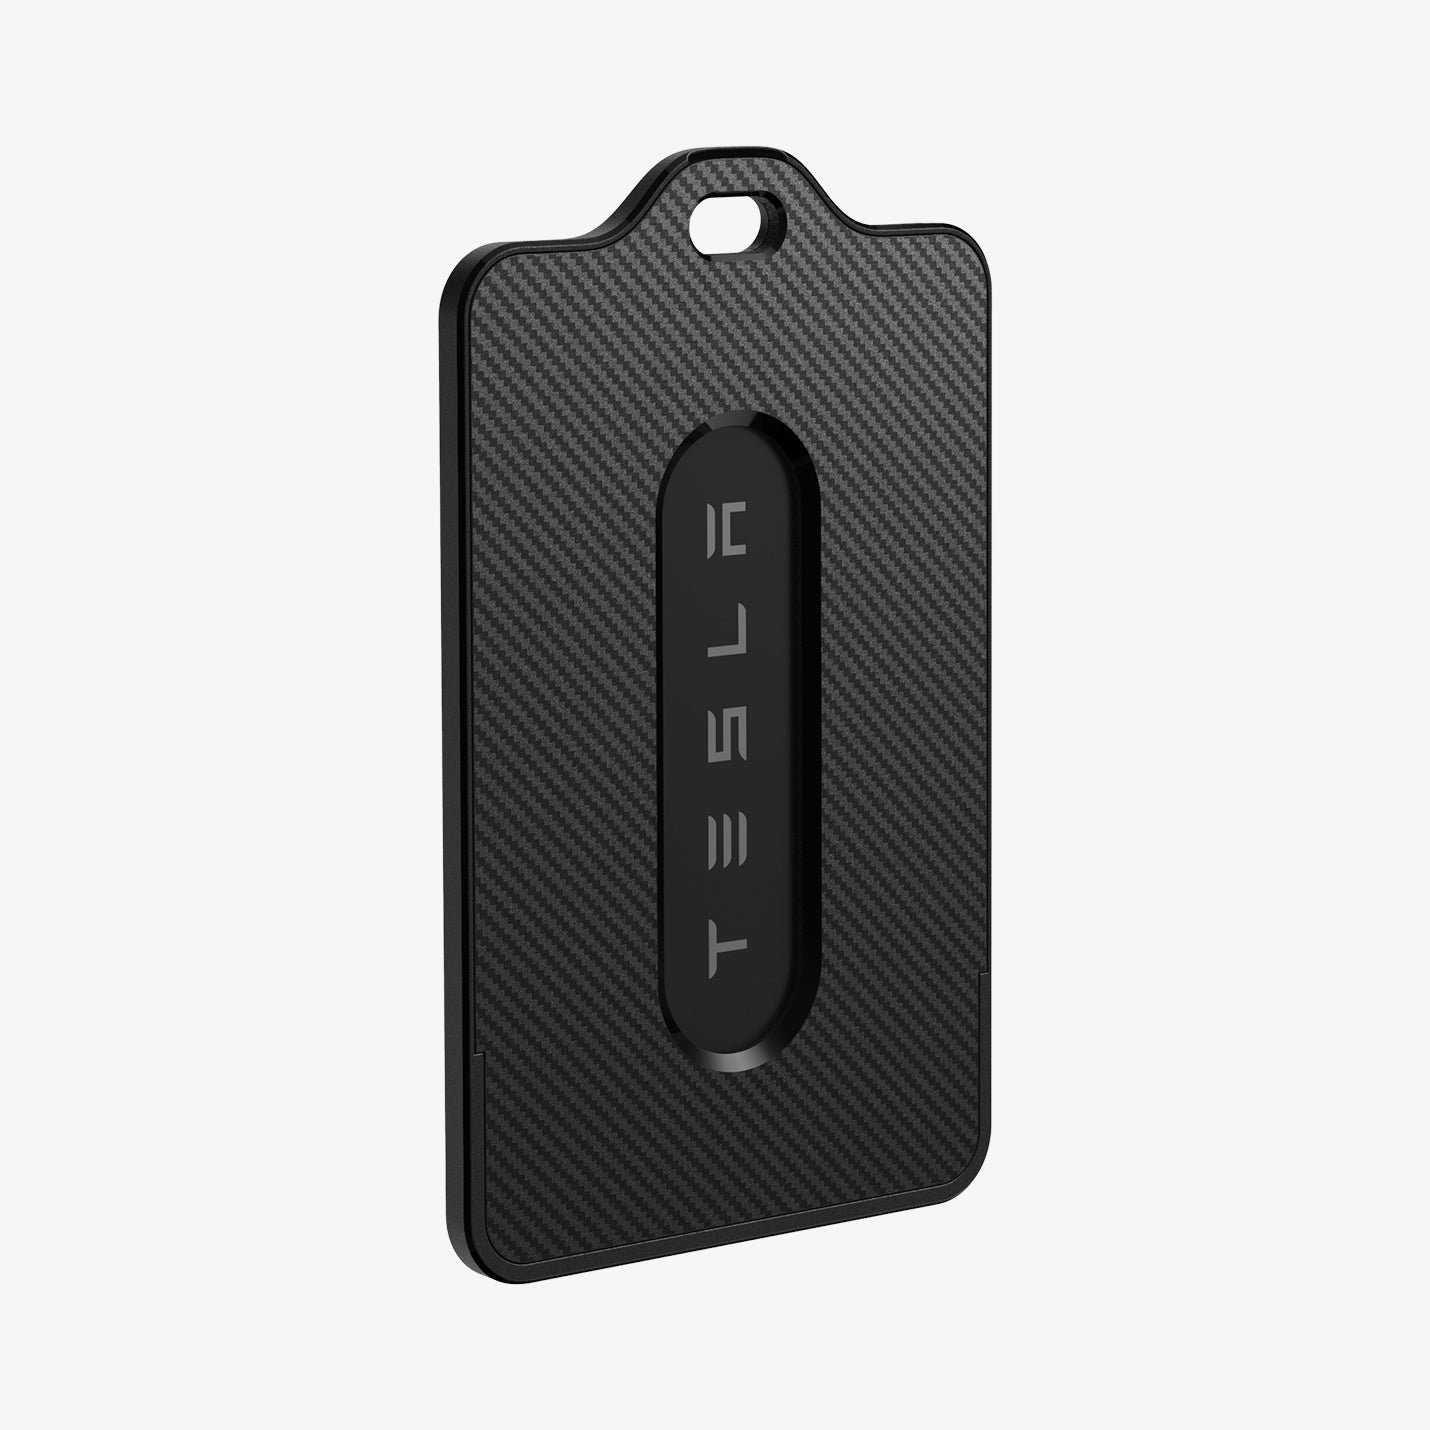 ACP07083 - Tesla AirFit Key Card Holder showing the back and partial side